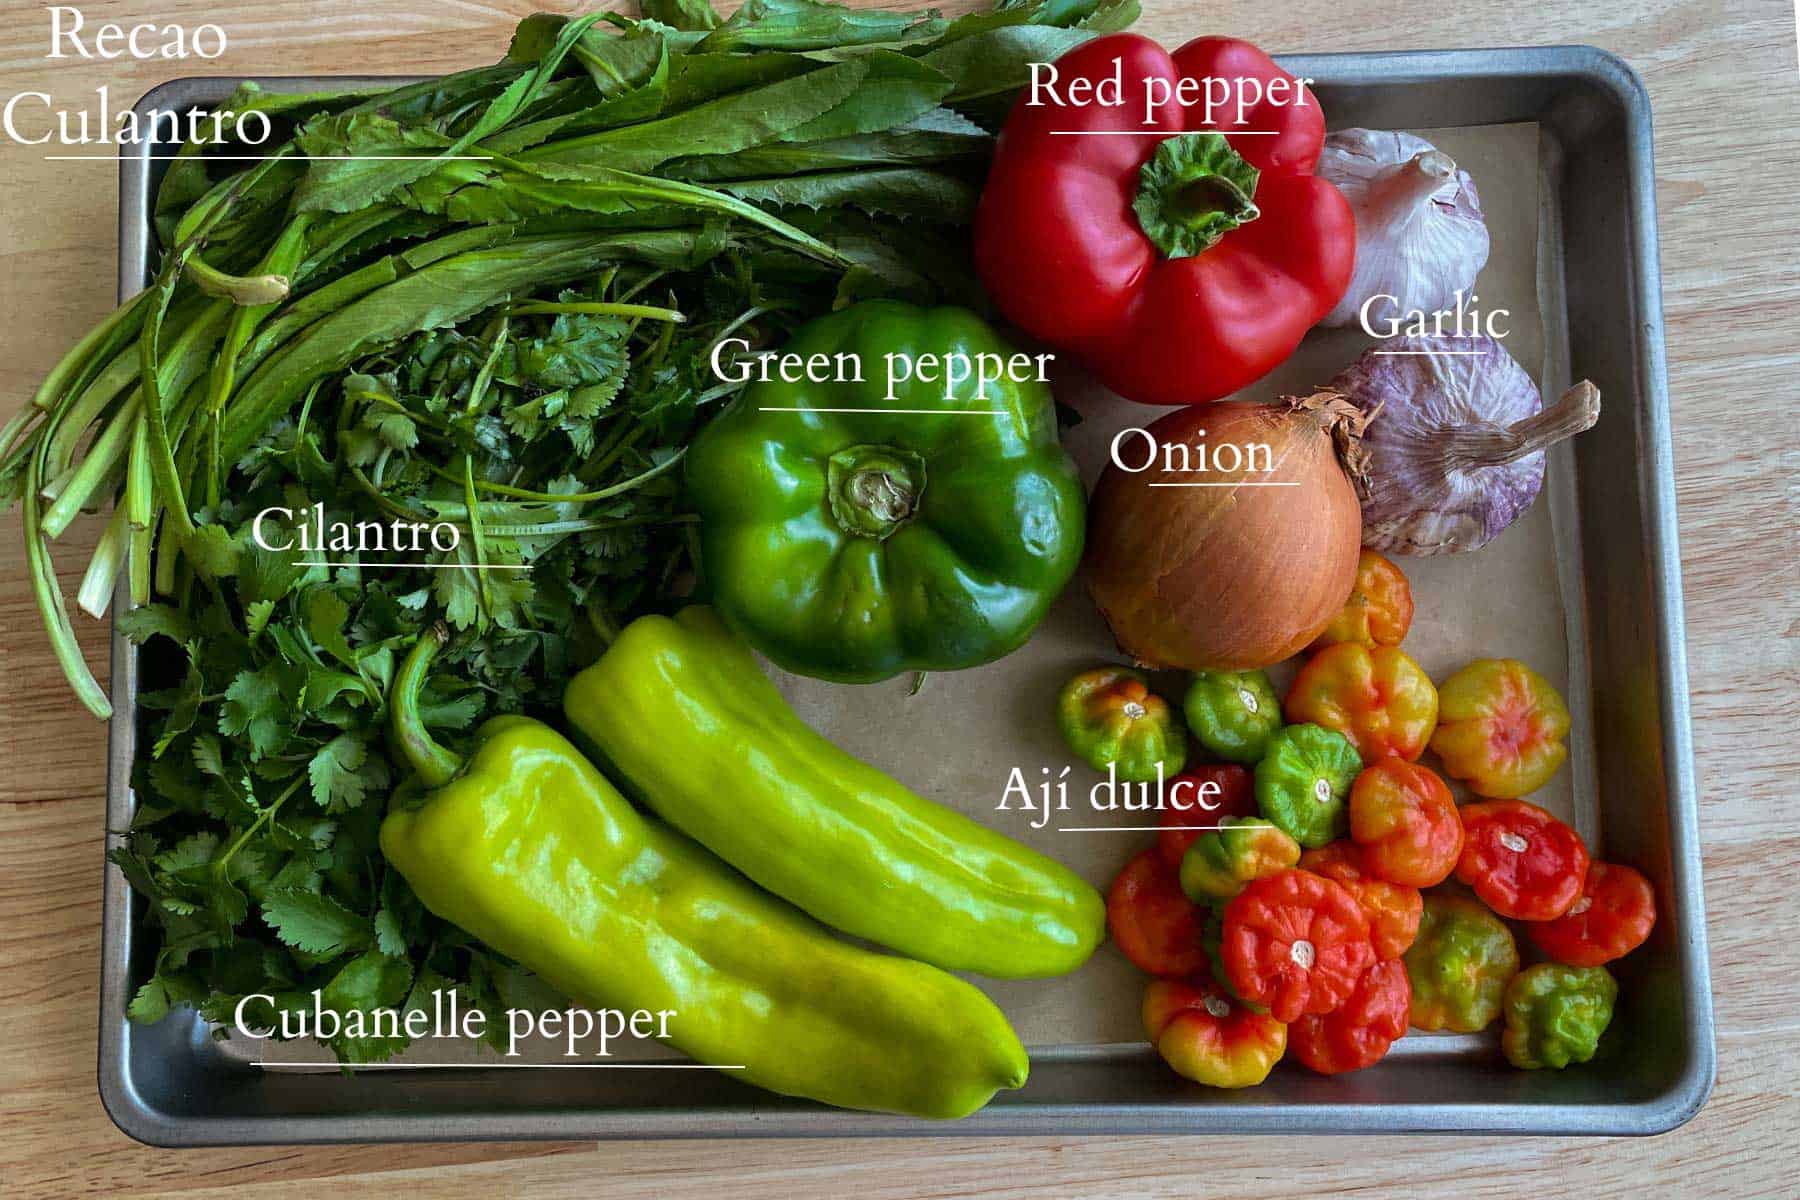 ingredients needed to make puerto rican sofrito. these ingredients are recao- culatro, cilantro, cubanelle pepper, green pepper, red pepper, garlic, onion and aji dulce.